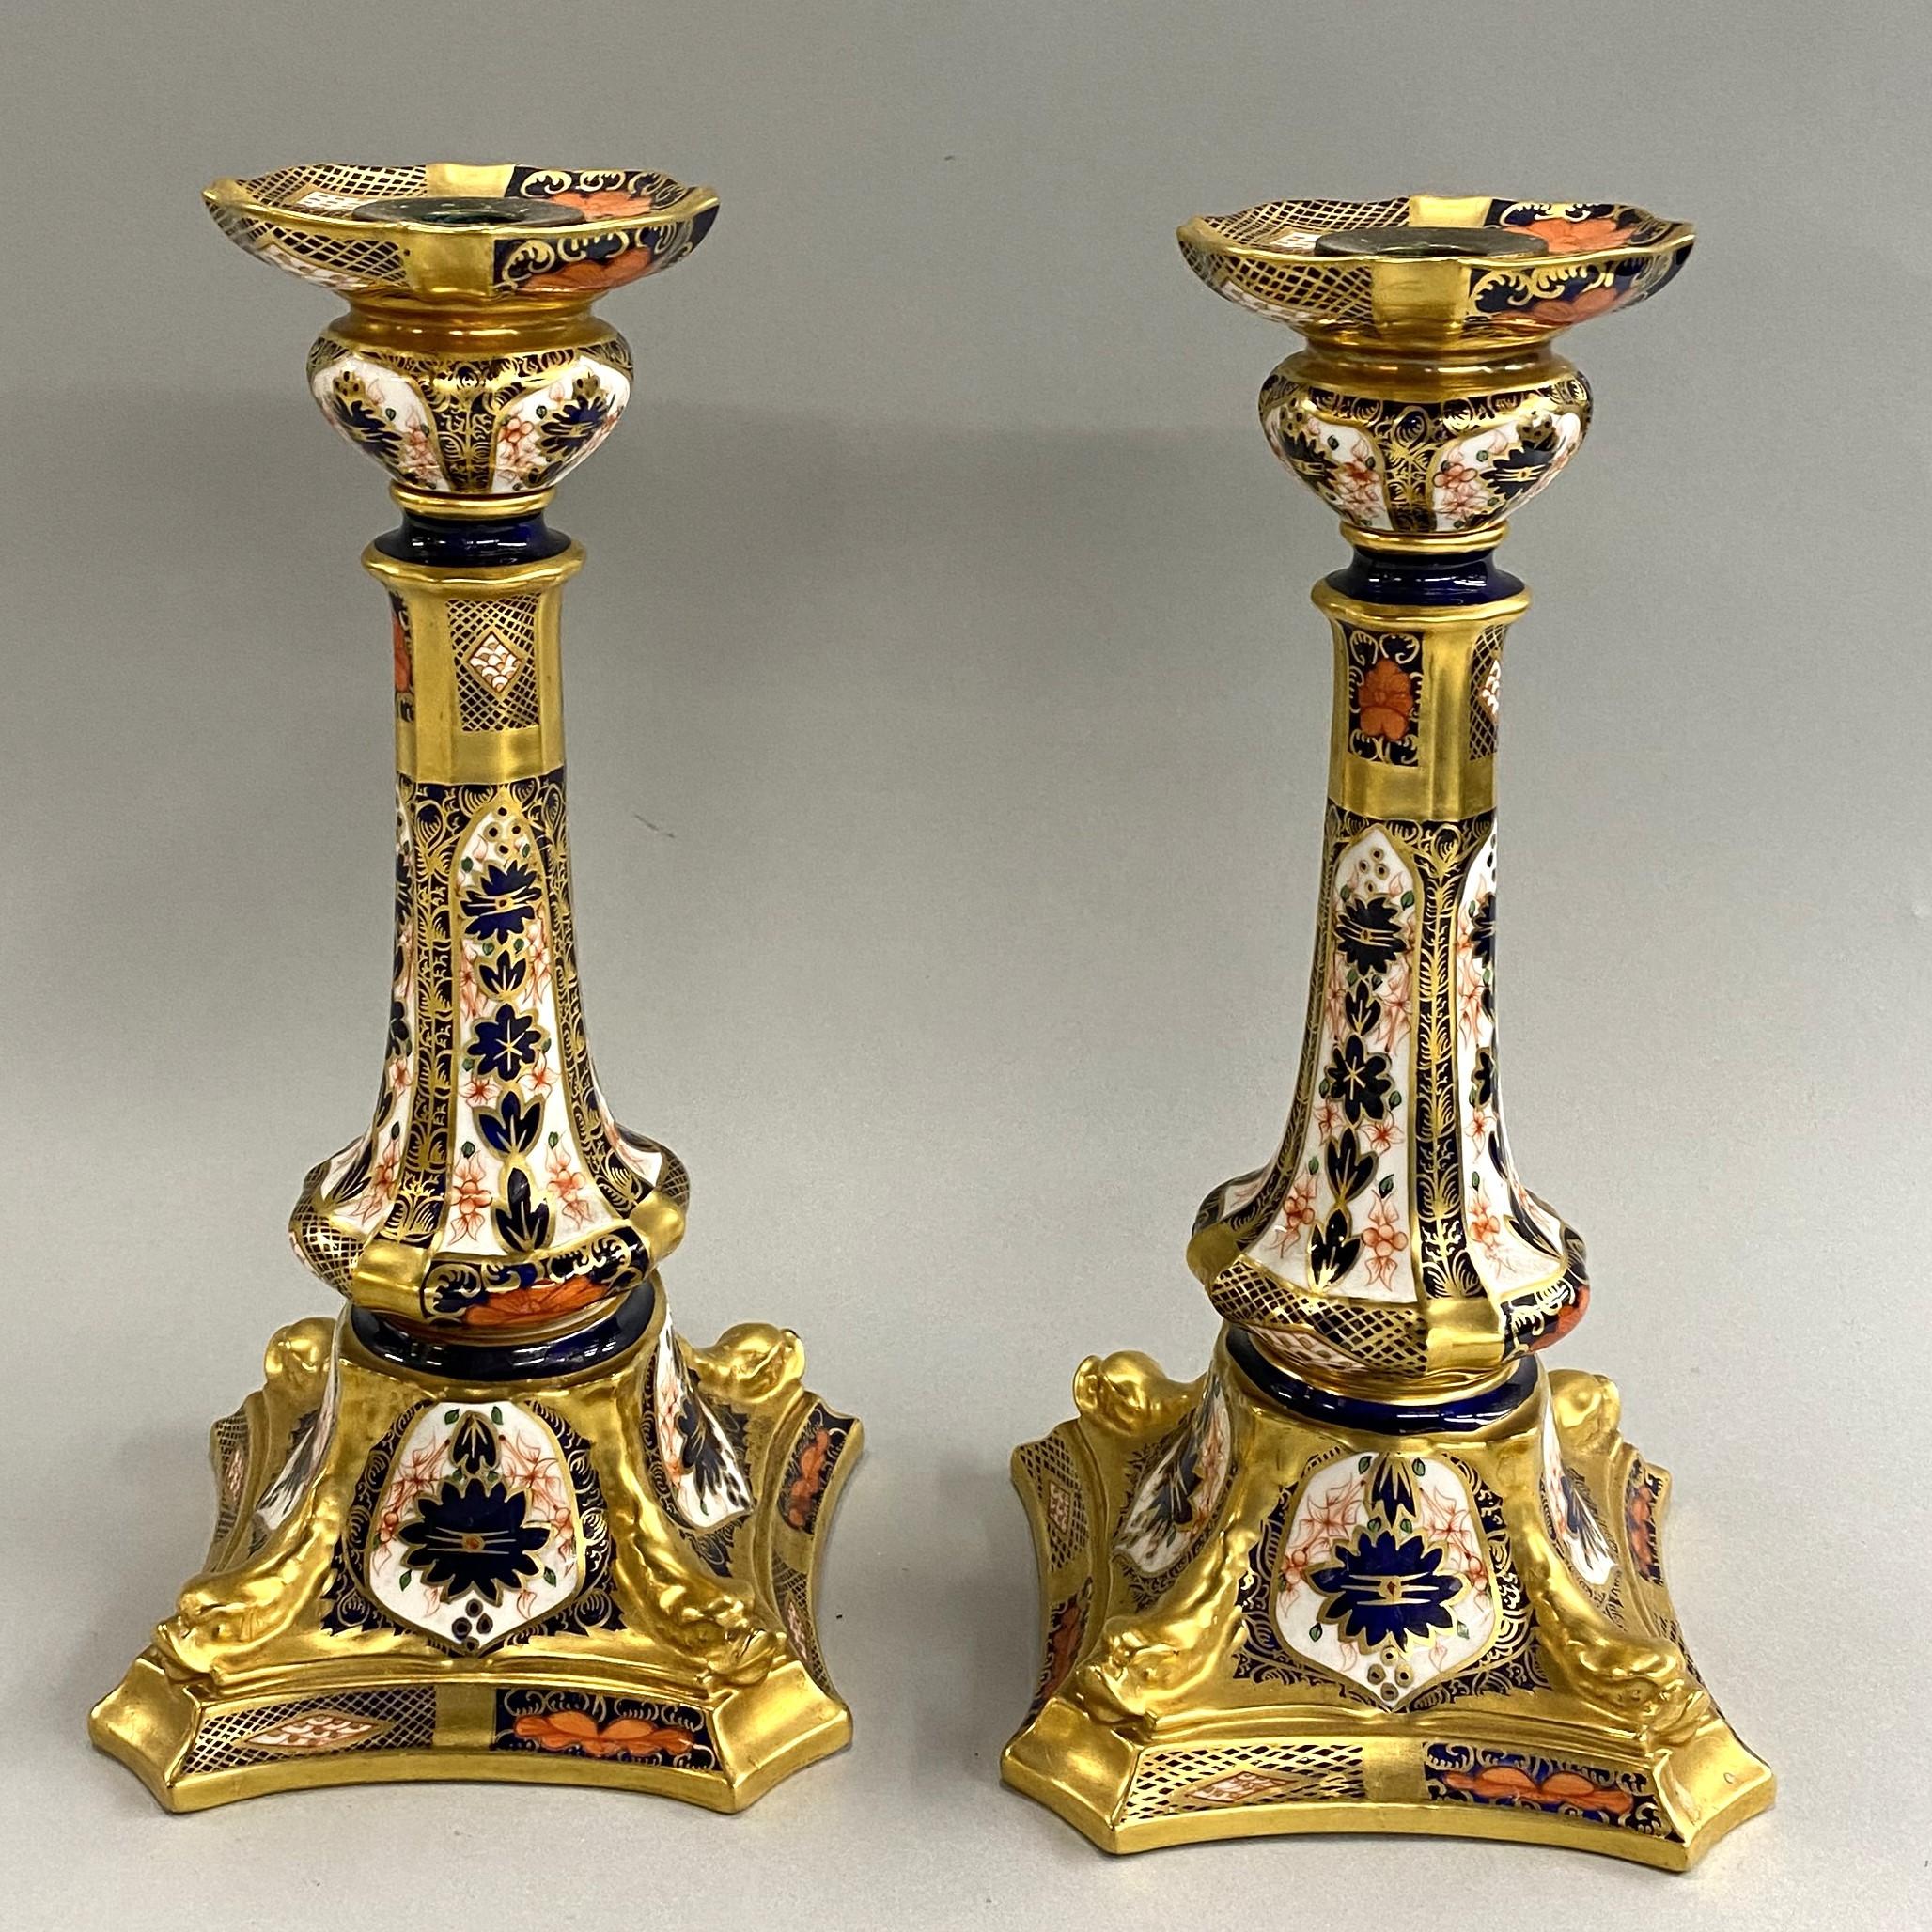 An exceptional pair of English polychrome porcelain or bone china Old Imari dolphin candlesticks by Royal Crown Derby, in blue, white, orange, and gilt highlights, signed on the underside, in very good overall condition, with minimal imperfections